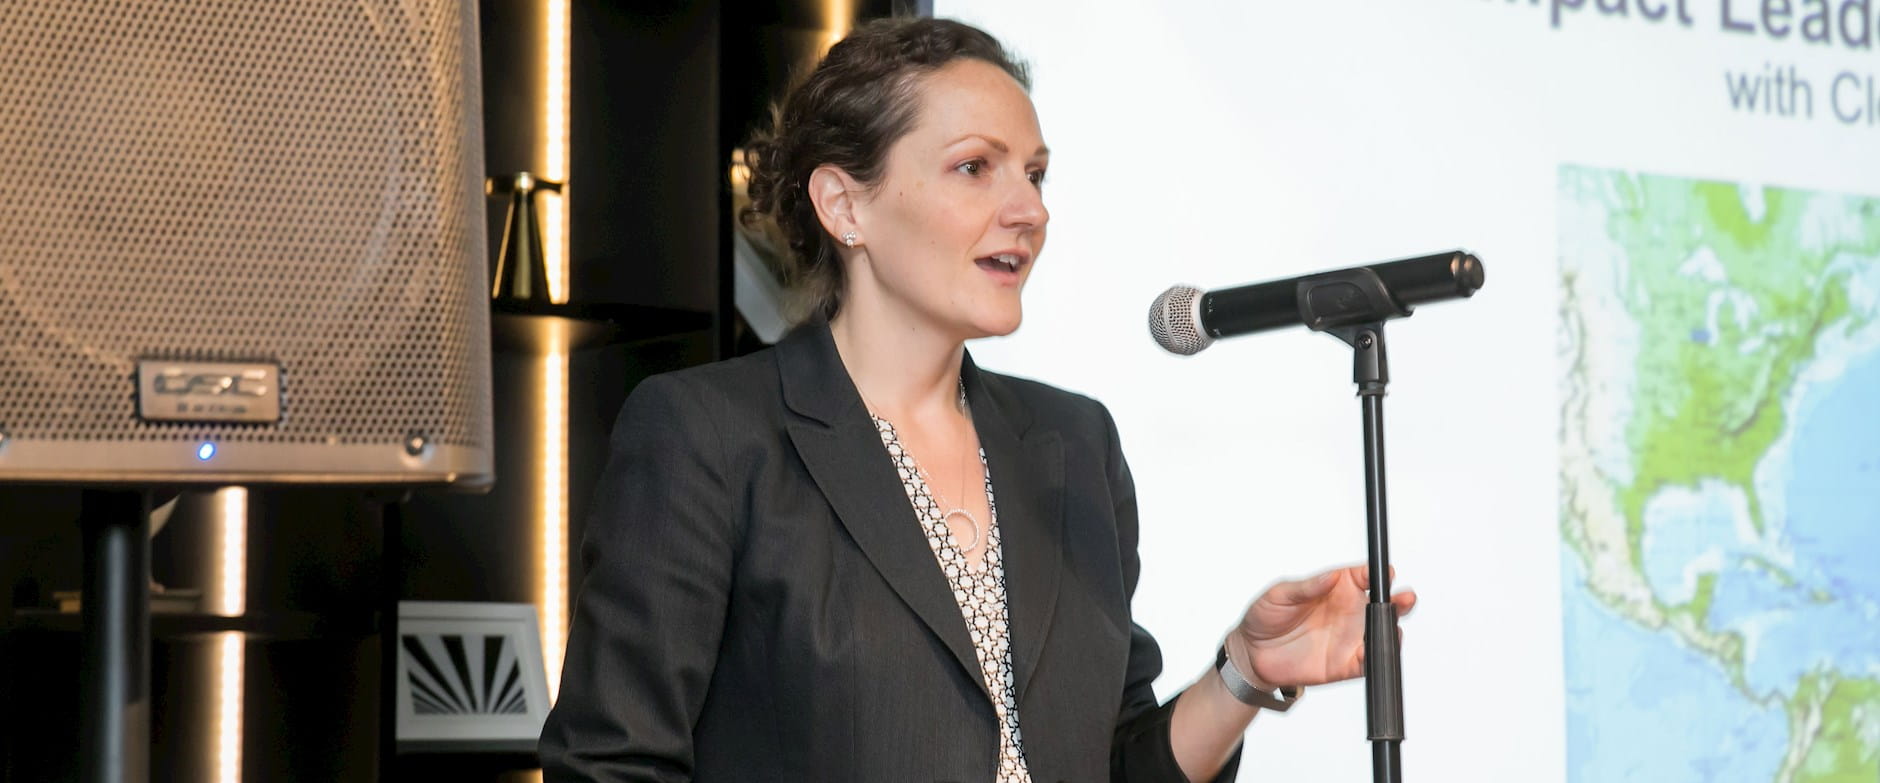 Christina Hachikian speaking in front of a microphone